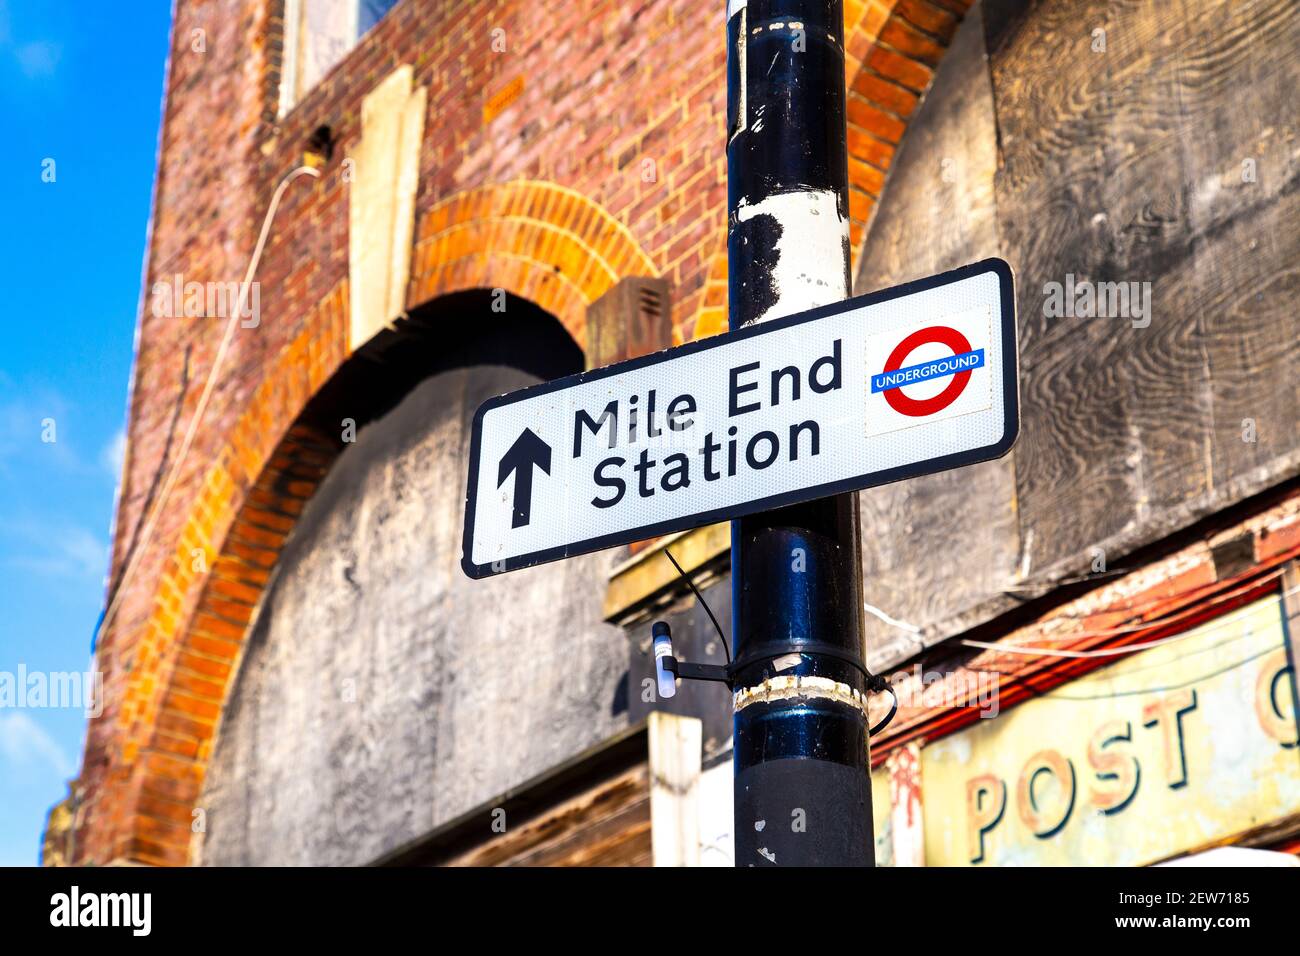 Mile End Underground Station sign in front of a run down former post office building, Tower Hamlets, London, UK Stock Photo